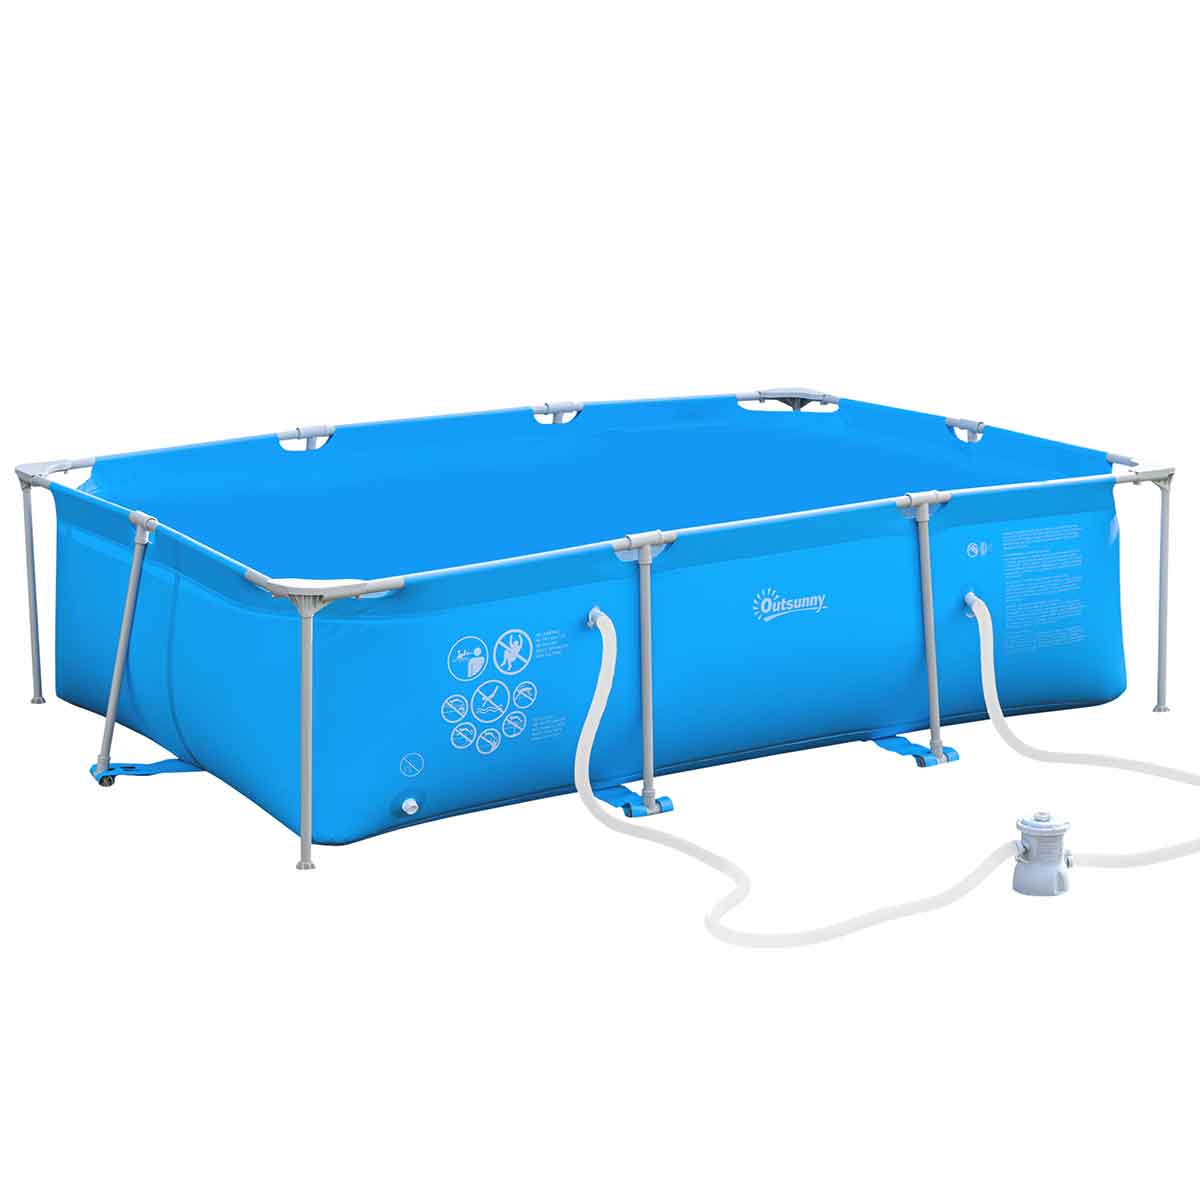 Alfresco Steel Frame Swimming Pool with Filter Pump and Reinforced Sidewalls, Blue